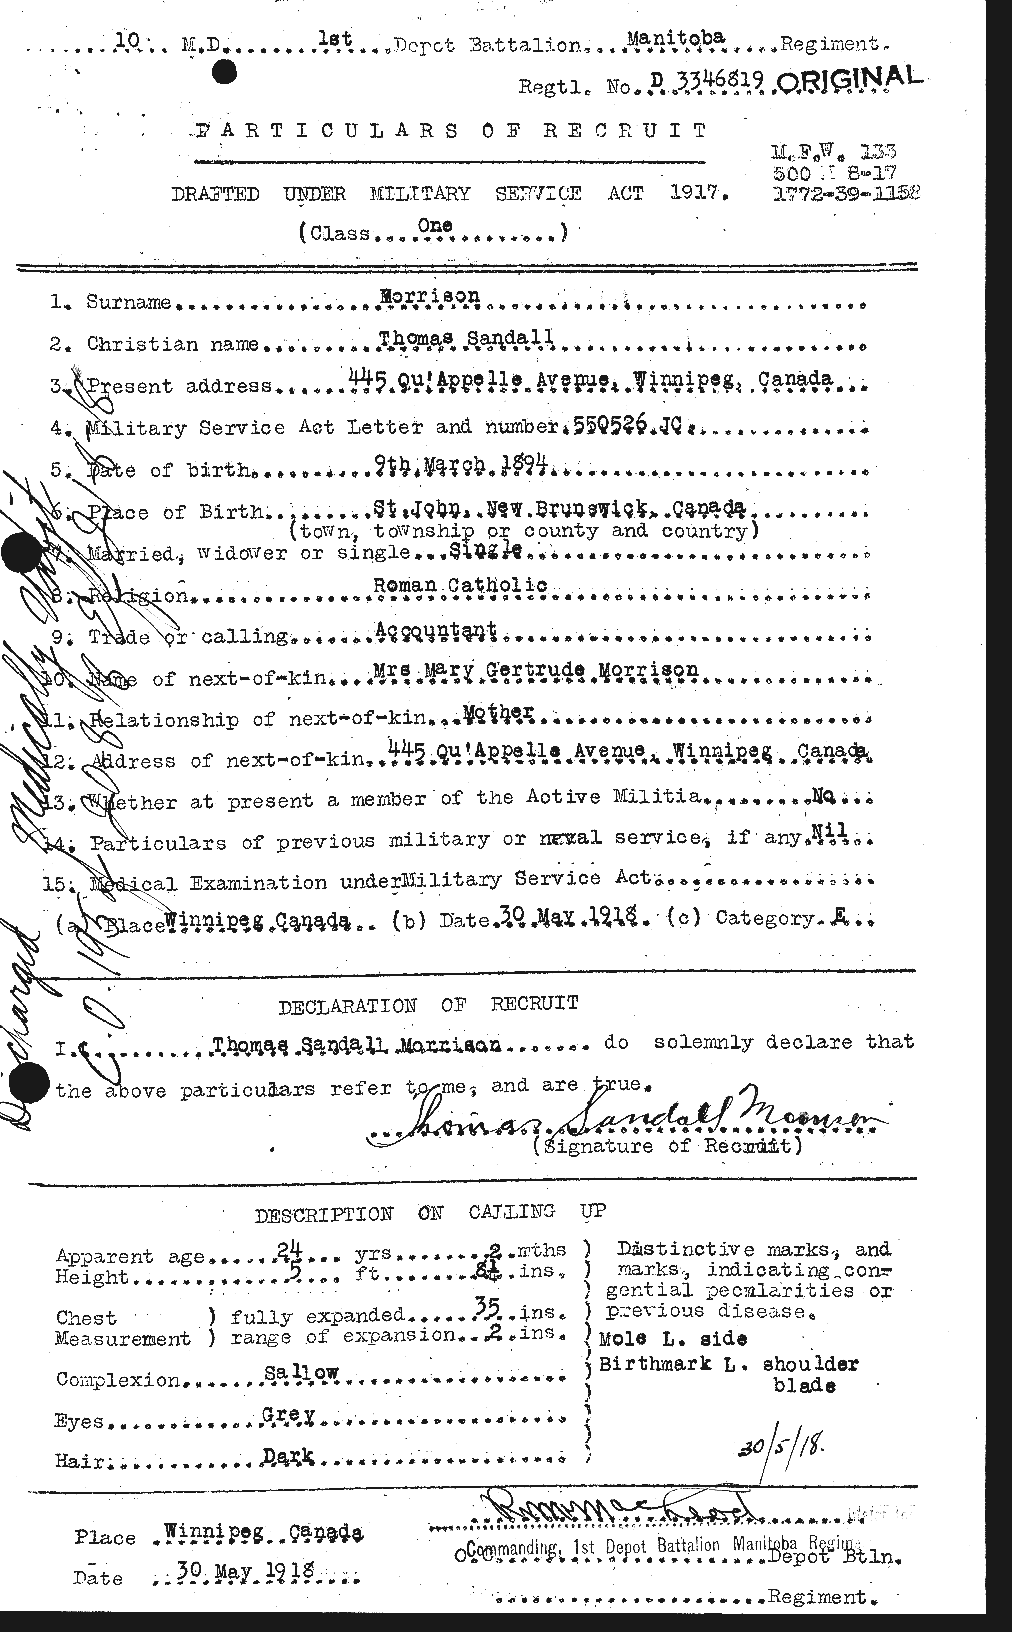 Personnel Records of the First World War - CEF 509195a